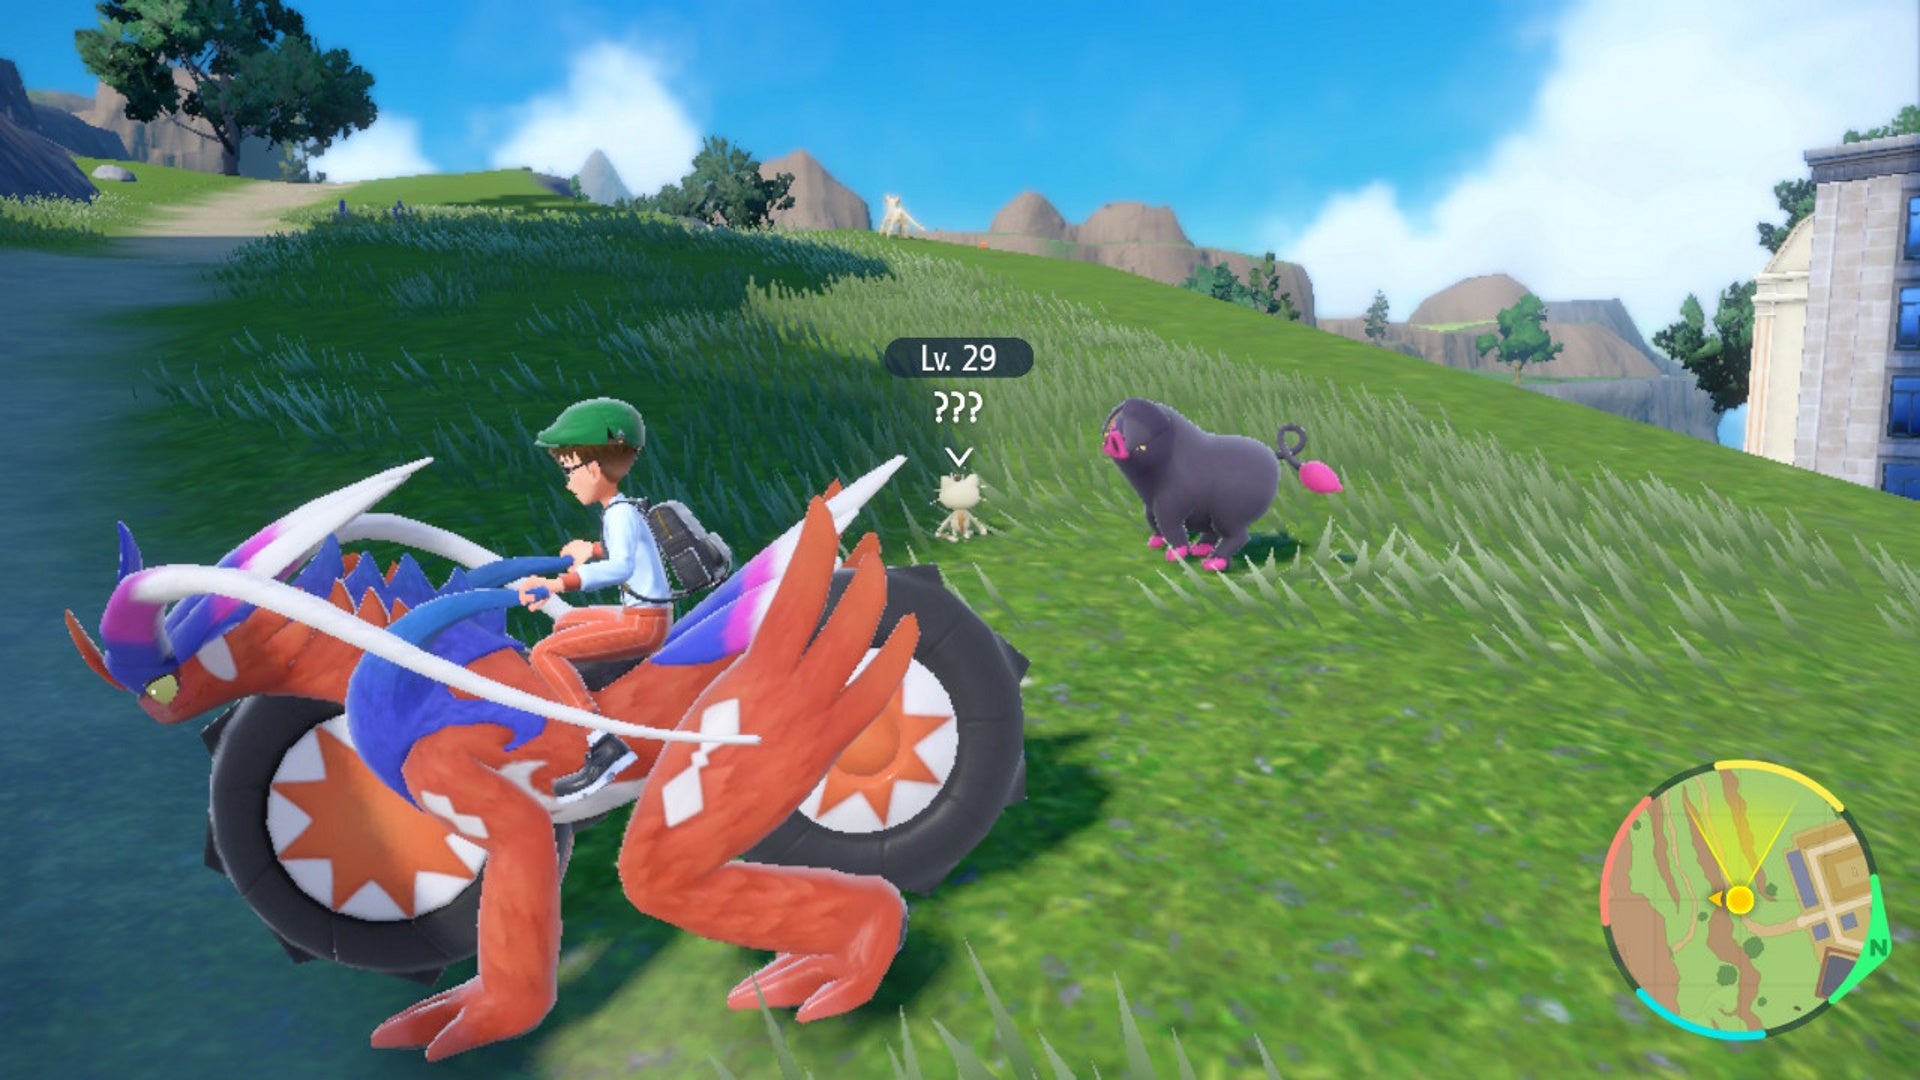 Zorua in Scarlet and Violet: An anime child on a large red lizard shaped like a bike looks at an animated cat with question marks over its head